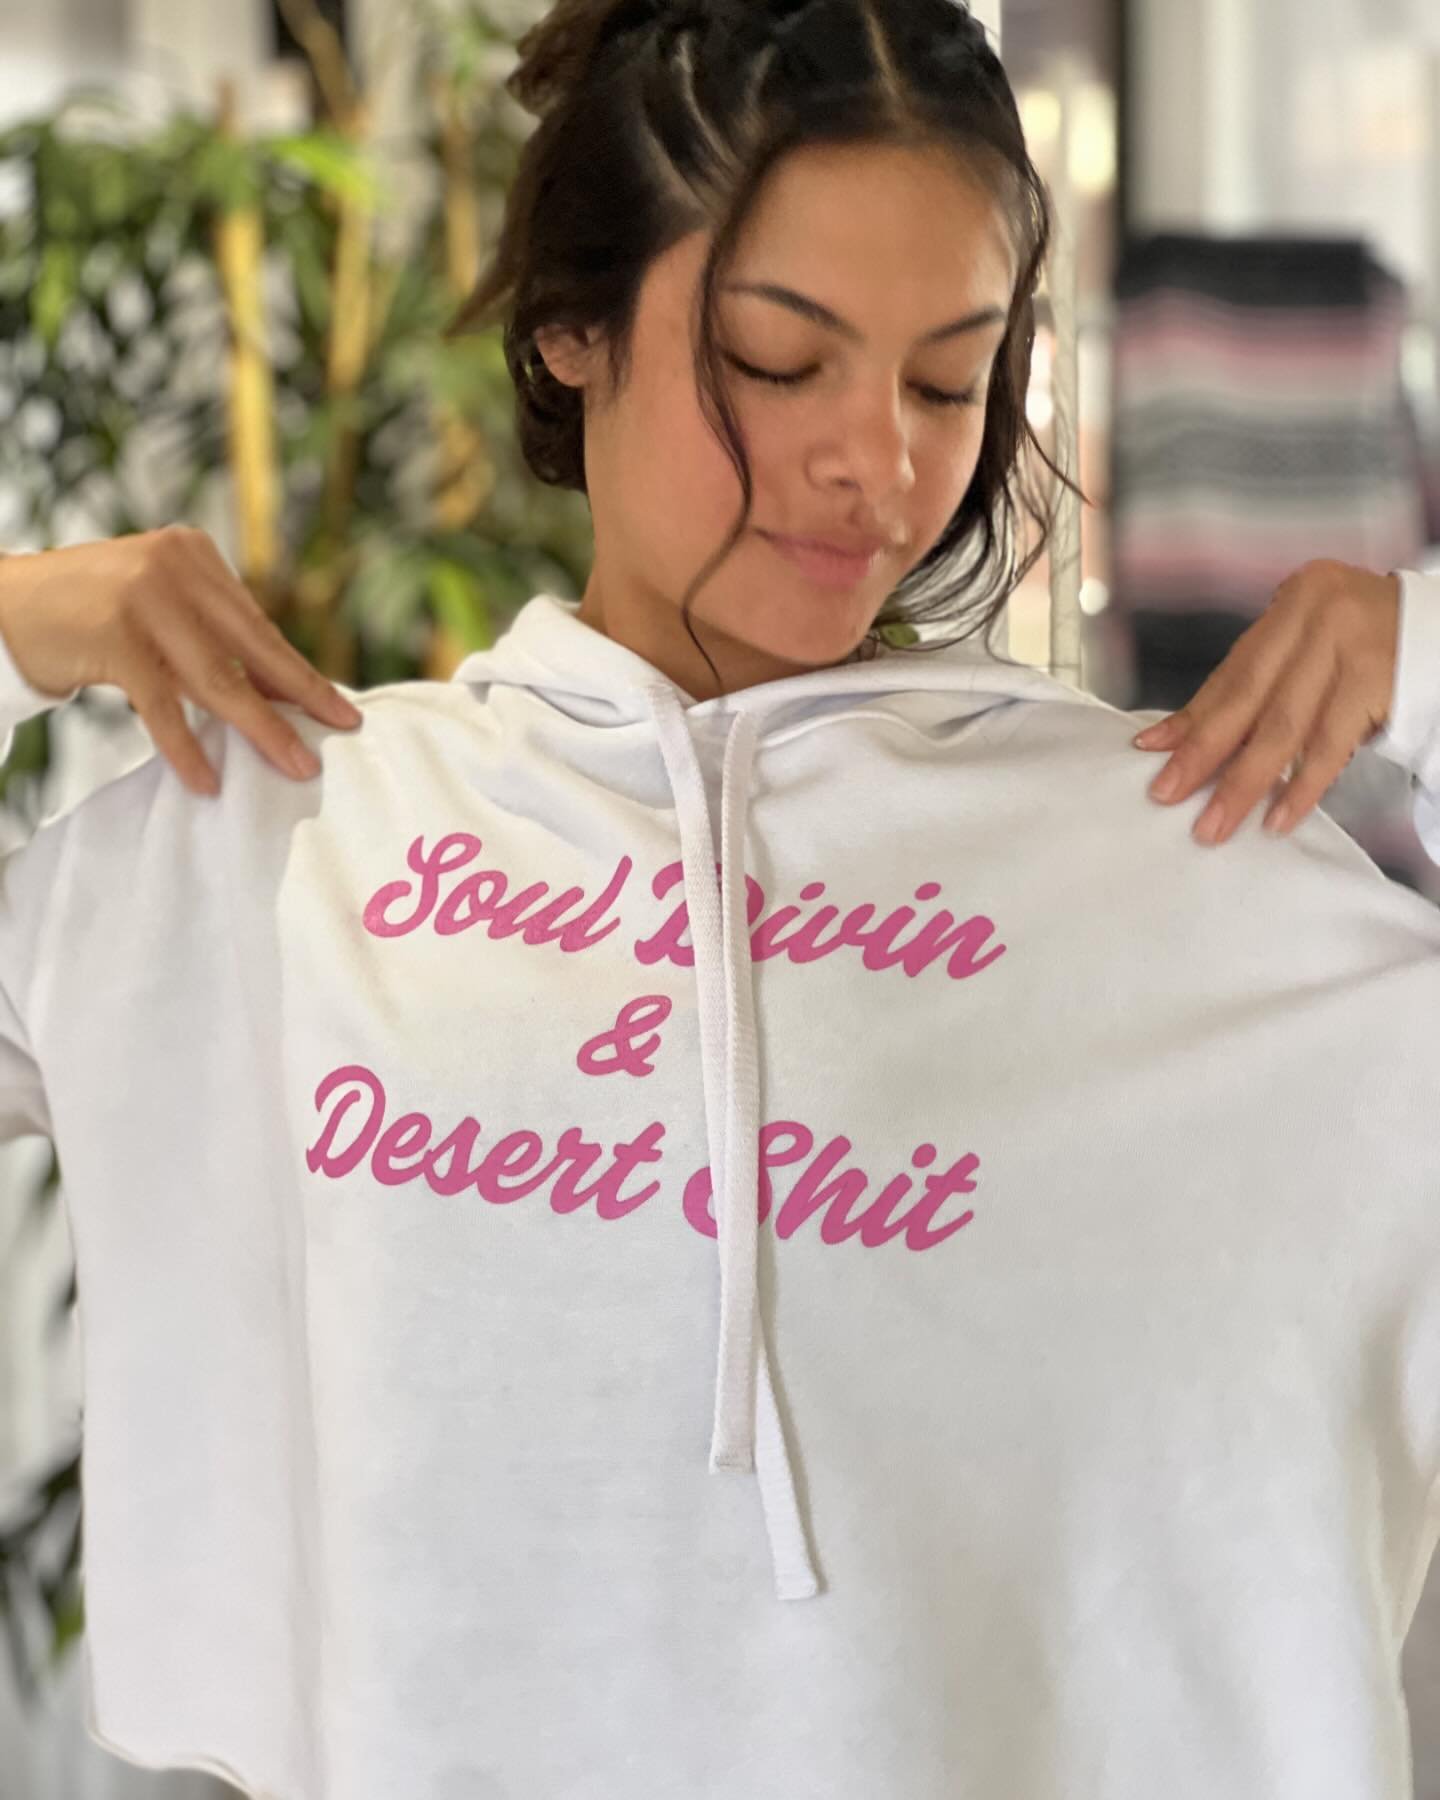 💗Soul Dive Swag!

We&rsquo;re down to the final few of some of our favorite pieces! Grab one before they&rsquo;re gone!

💗Soul Divin &amp; Desert Shit hoodie $45
💗SDY Pink Zip hoodie $45
💗LOVER hats $40
💗Be Kind &amp; Soul Dive tee $30

DM to ho